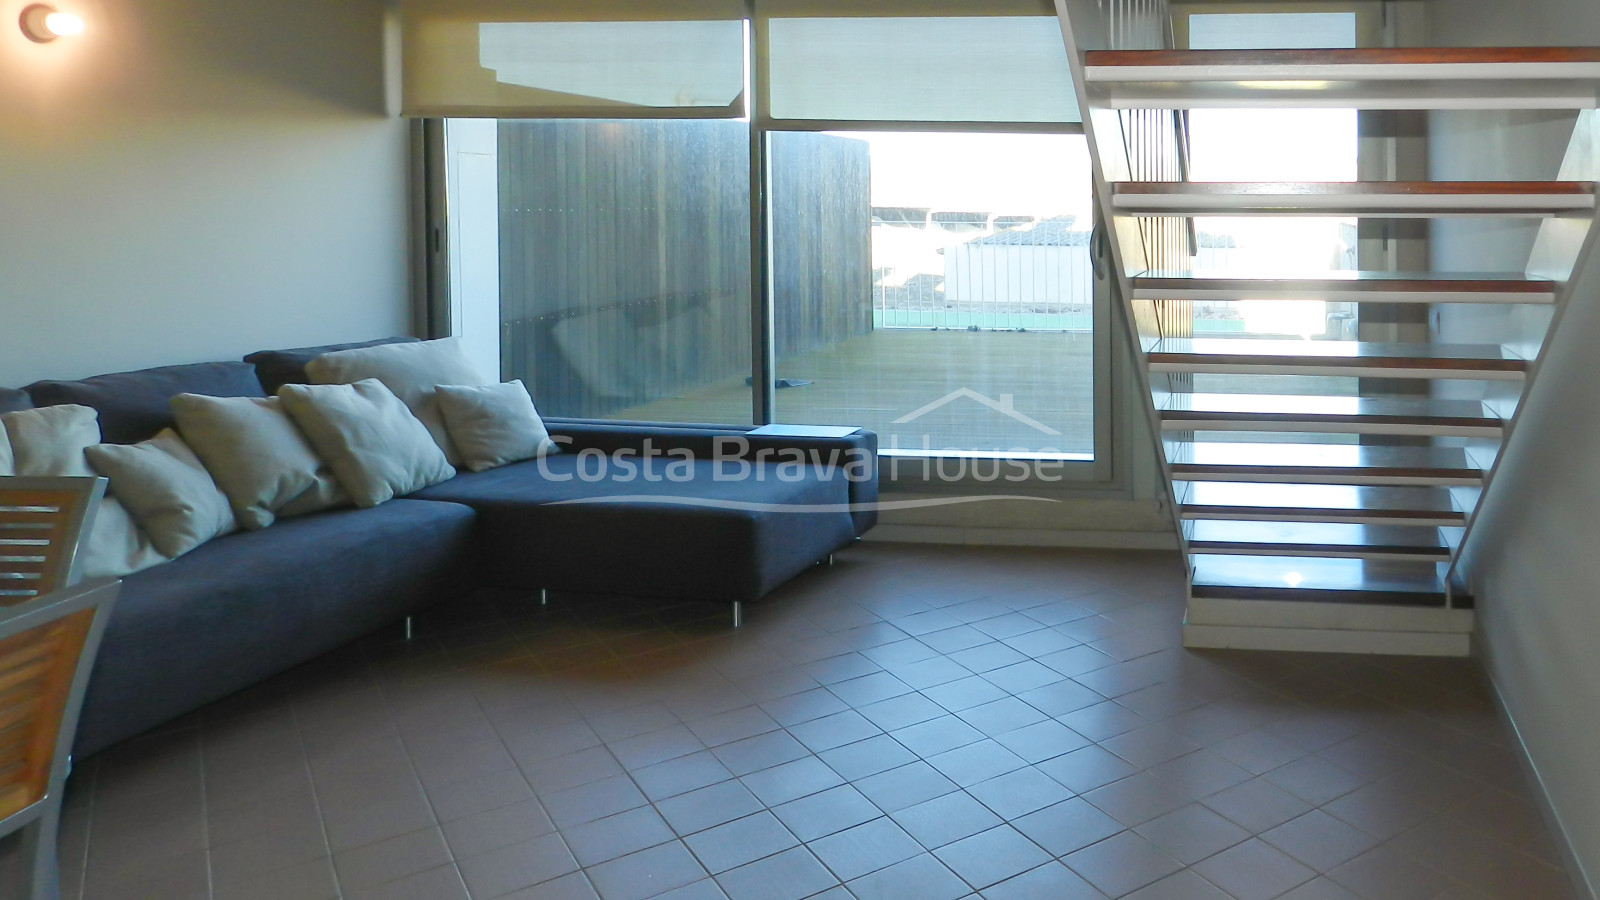 3 recently built apartments for sale in Palafrugell Centro